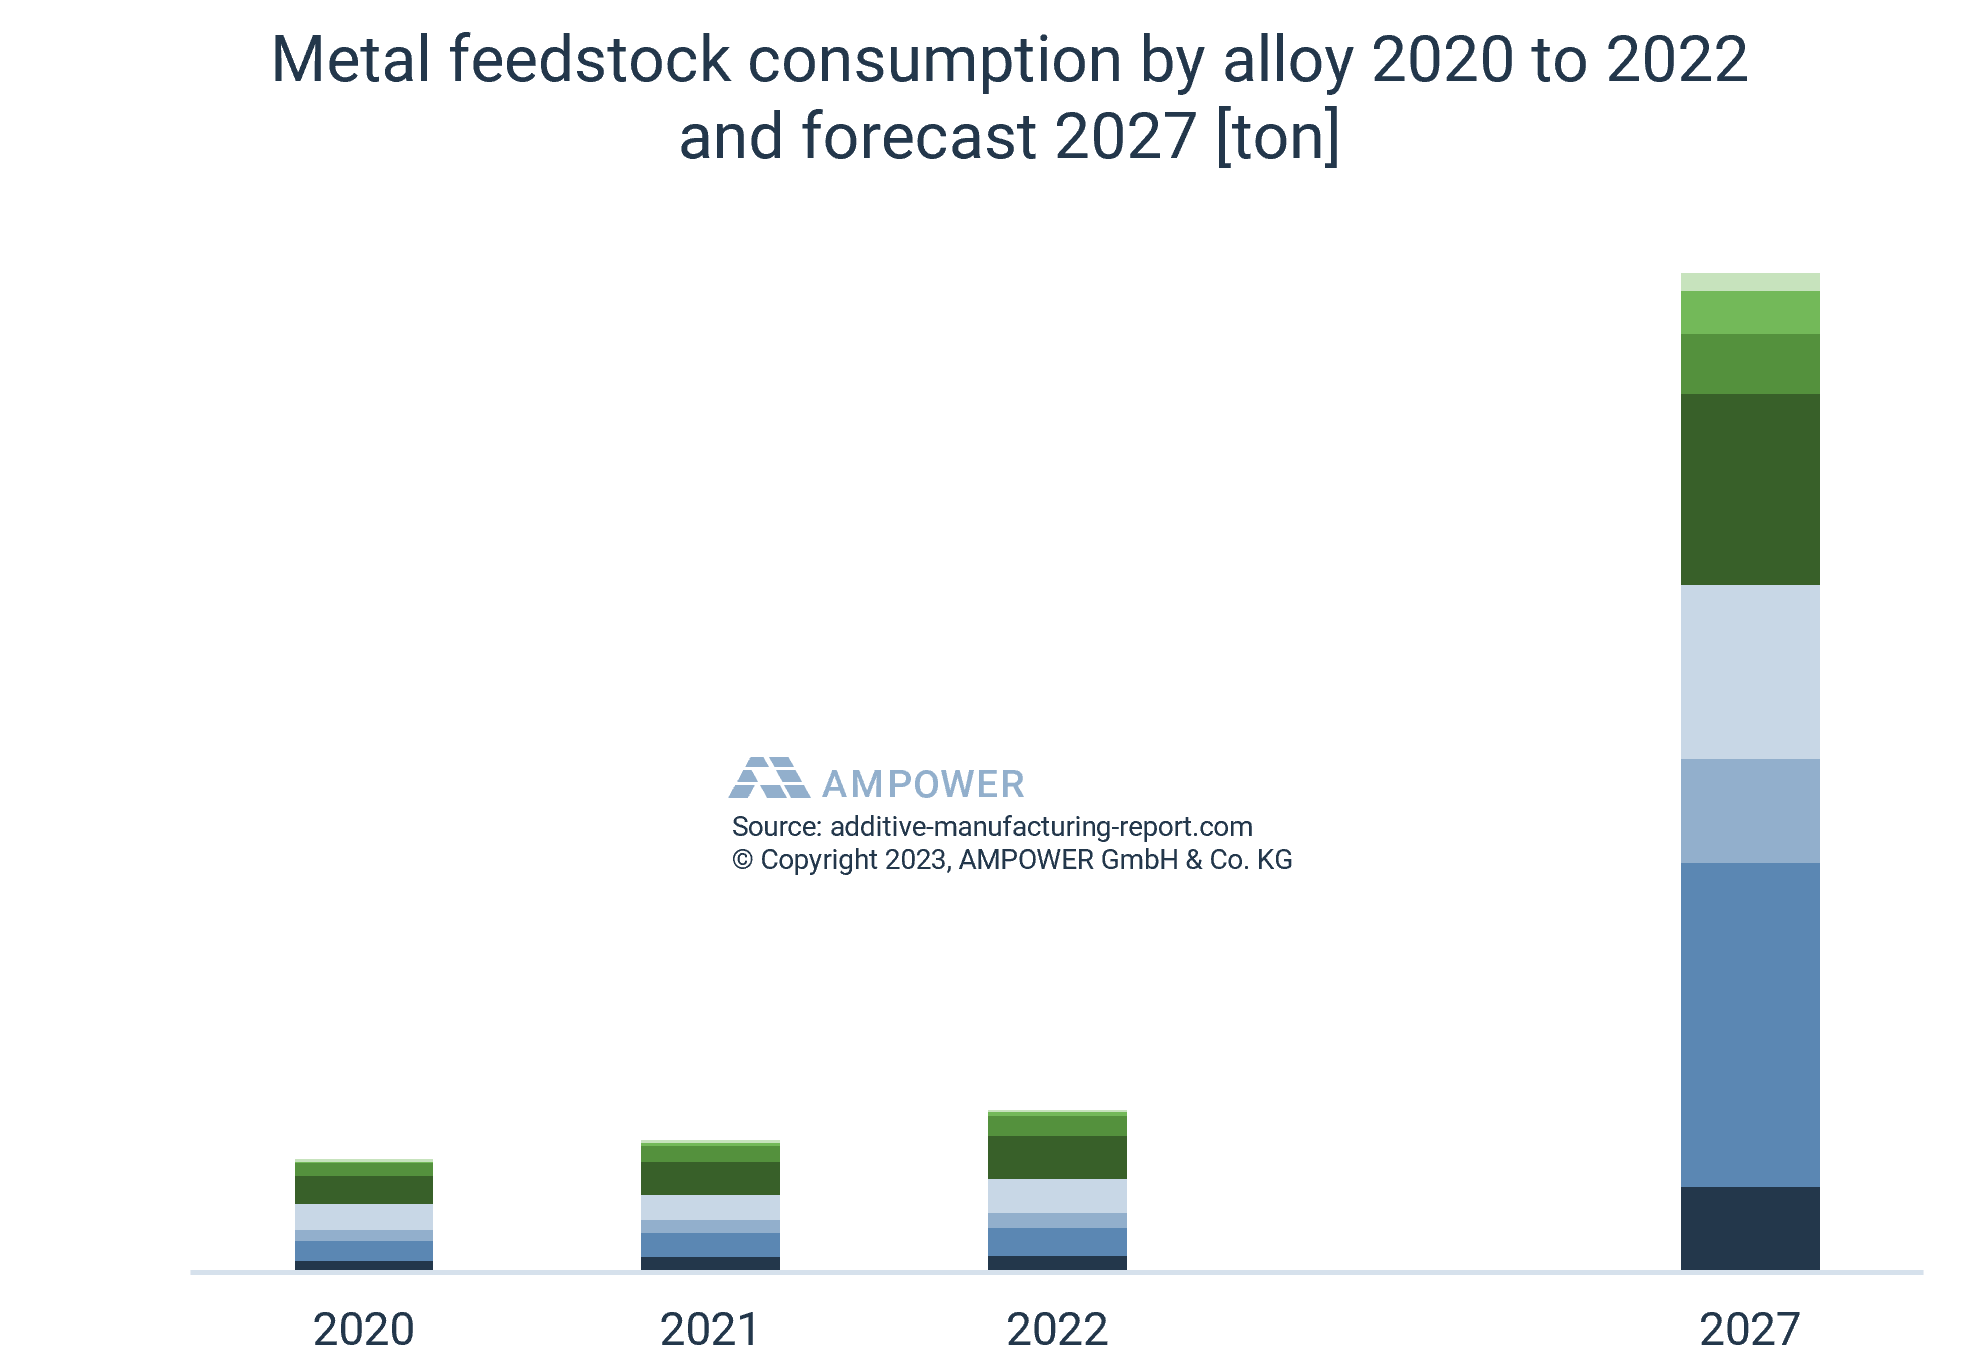 Metal feedstock consumption by alloy 2020 to 2022 and forecast 2027 [ton]